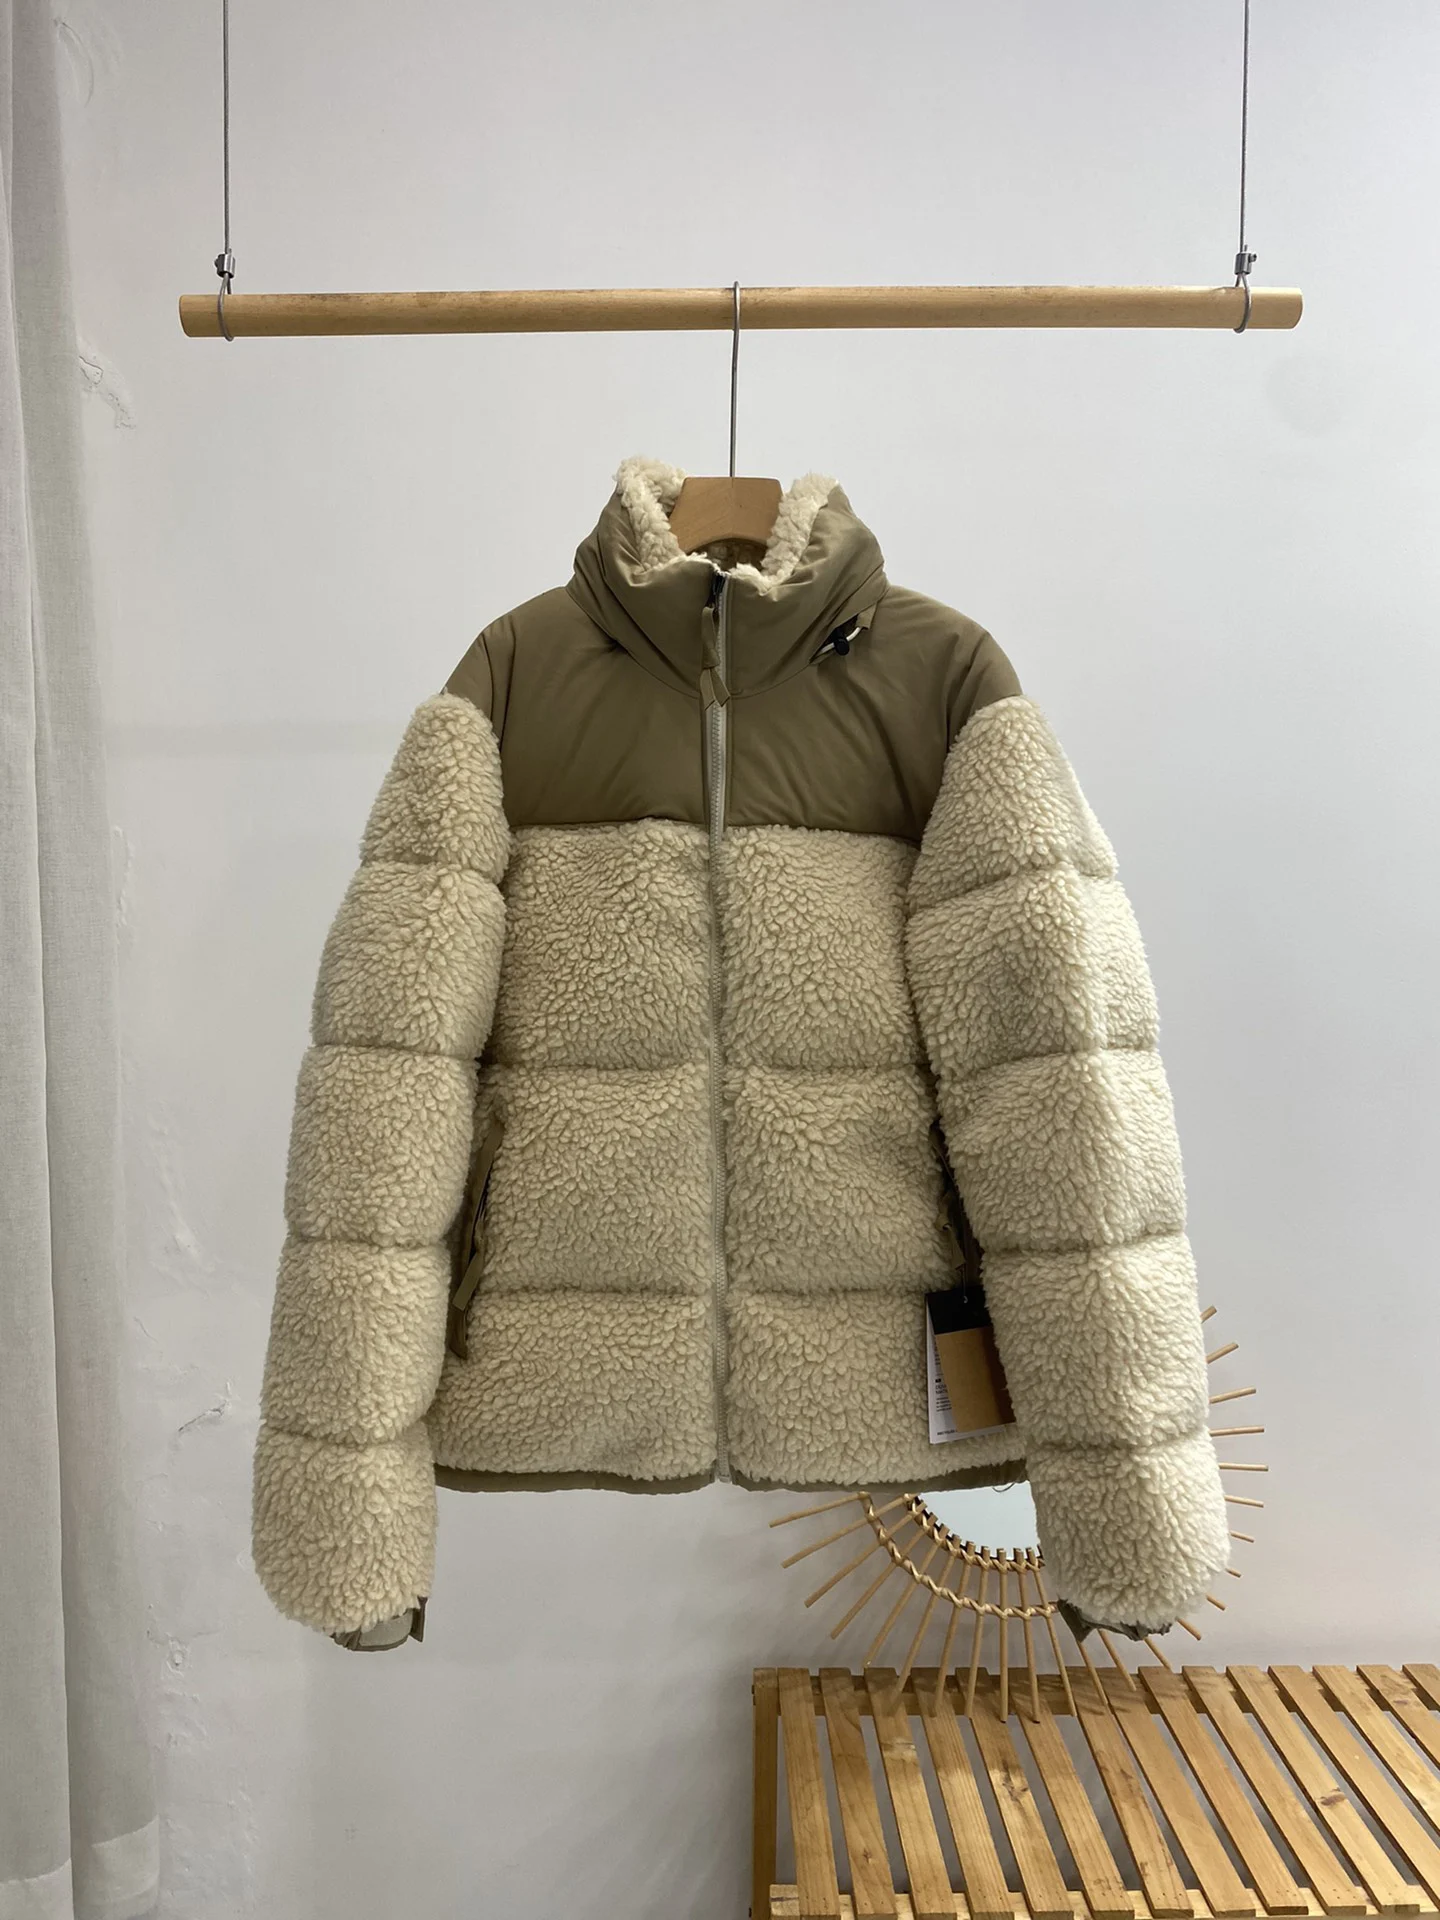 Winter Men's Down Jacket Stand Up Collar Jacket For Women Suede Fur Jacket For Women To Keep Warm, Thickened Lamb Jacket